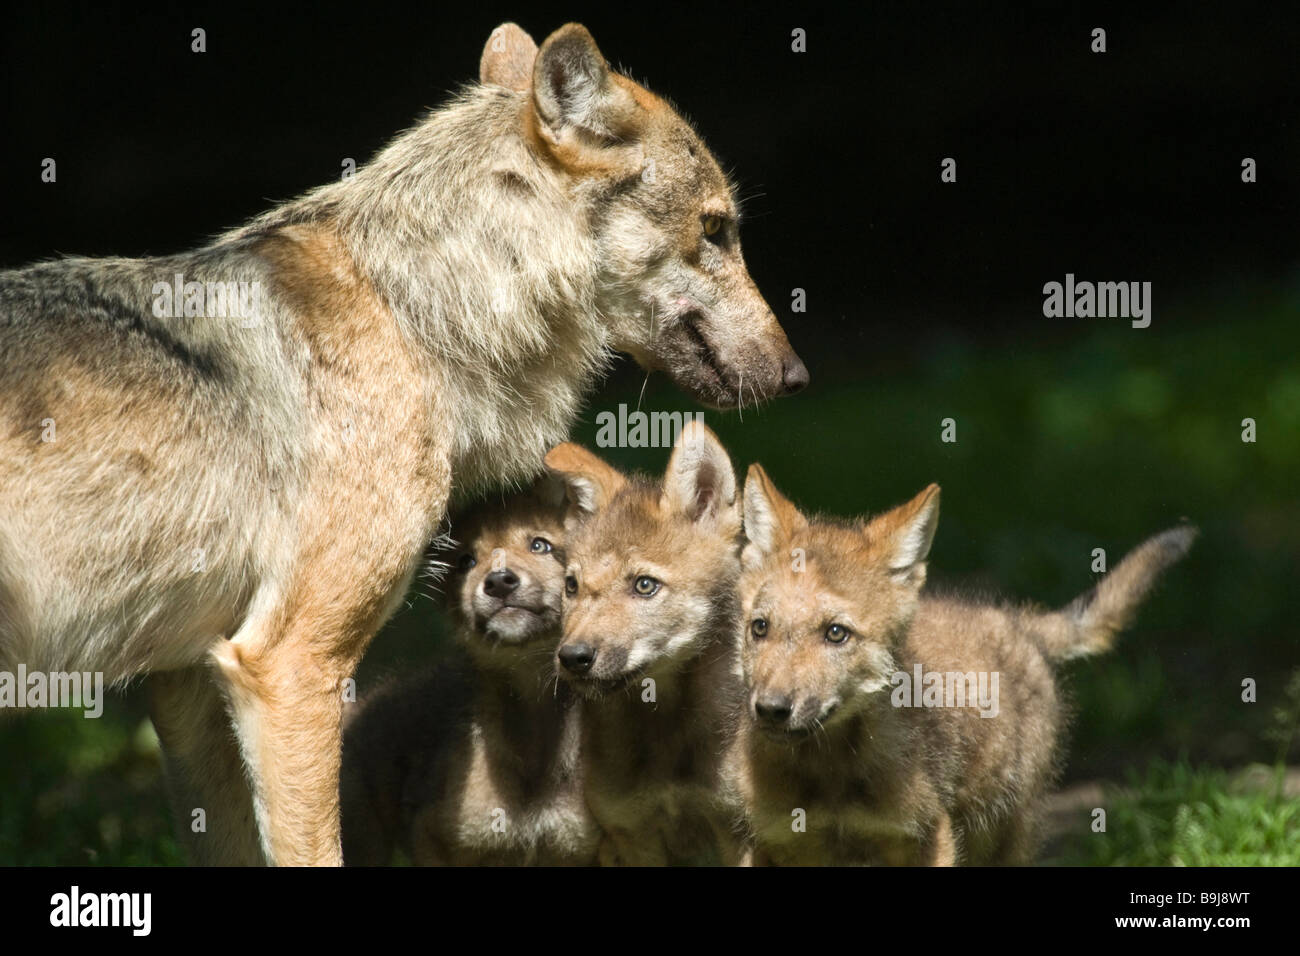 Gray Wolves (Canis lupus), adult and three young animals, Sababurg zoo ...